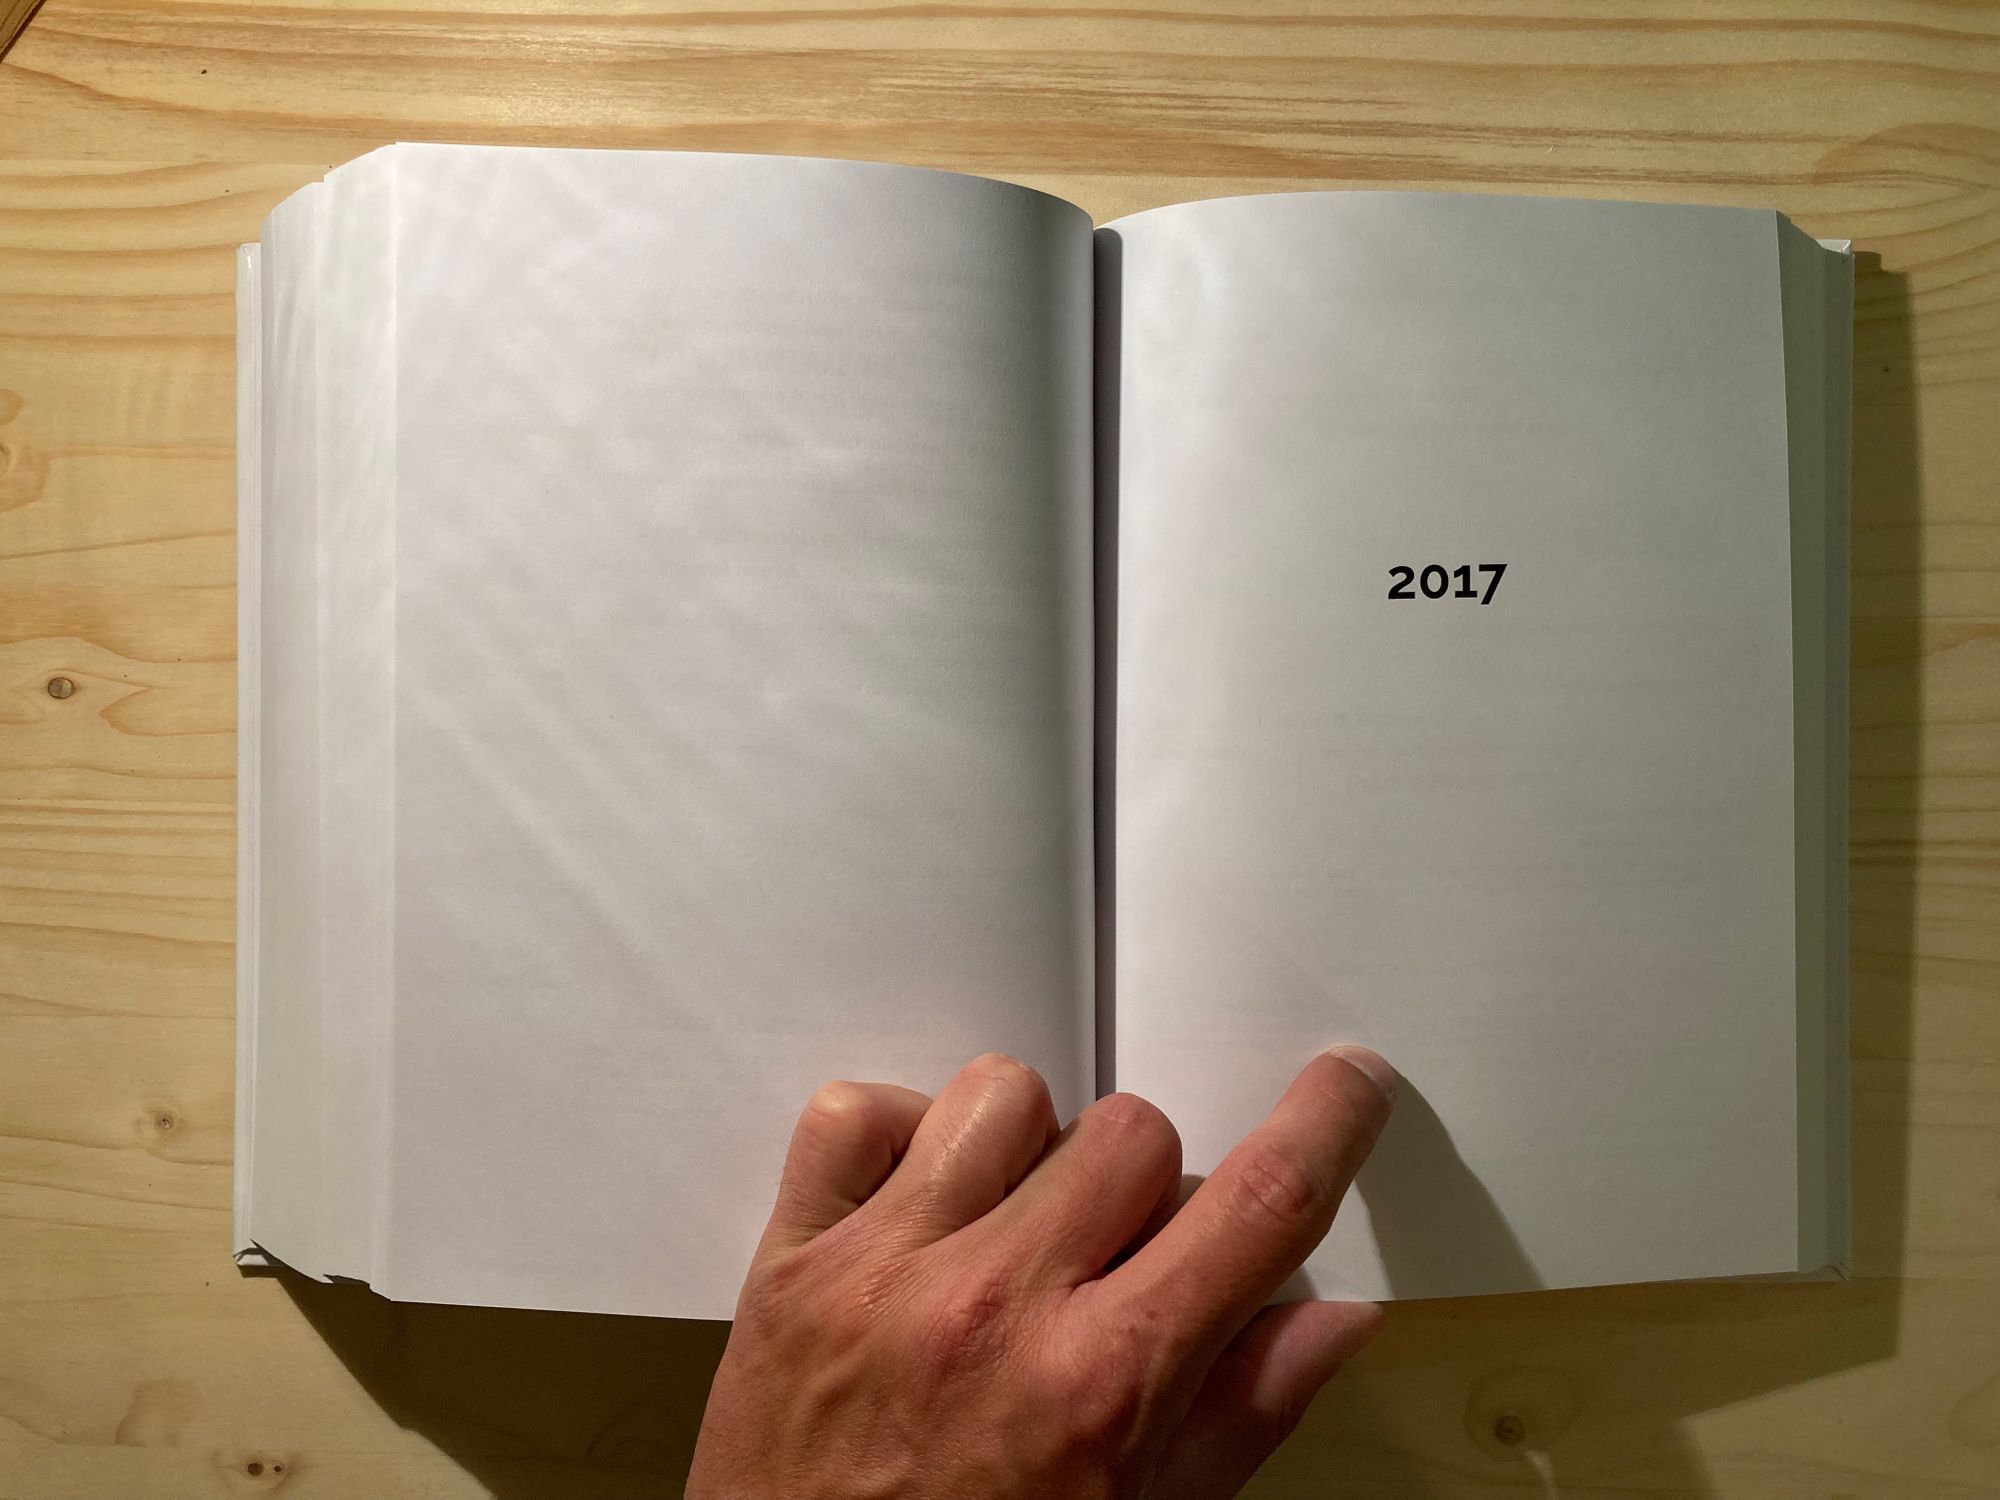 13 years of messages in one book: printing Messenger, SMS, emails.